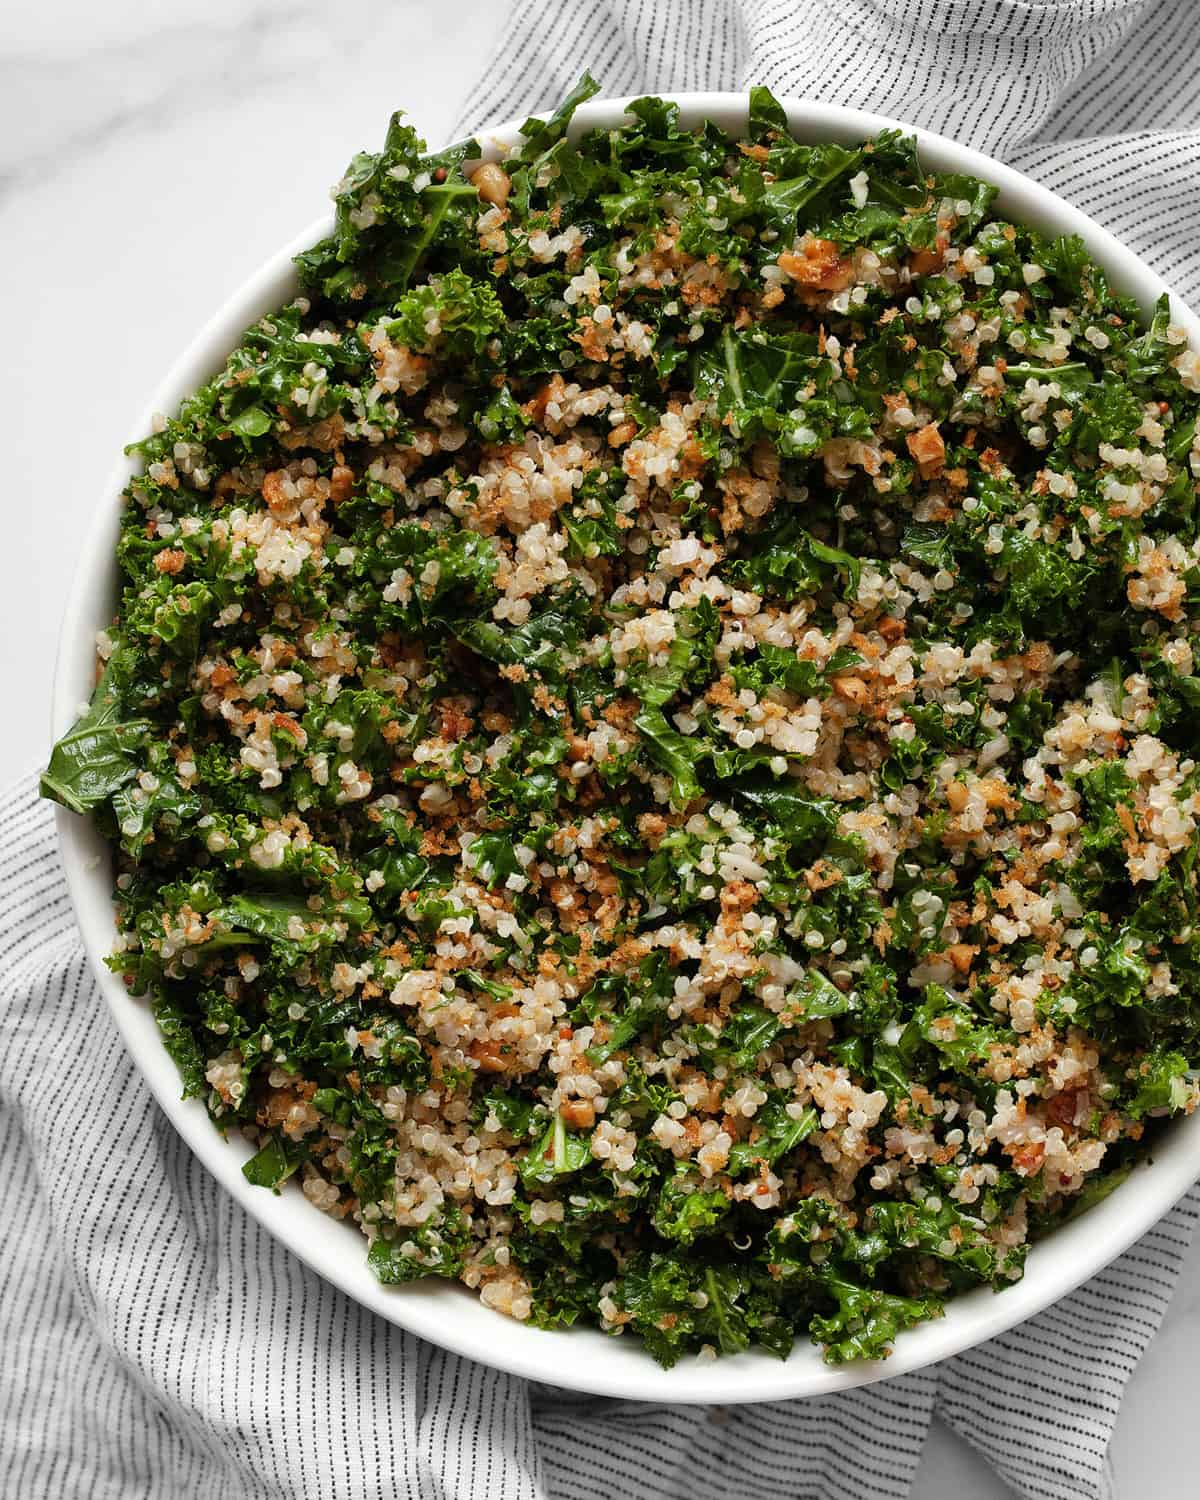 Kale salad with quinoa in a bowl.